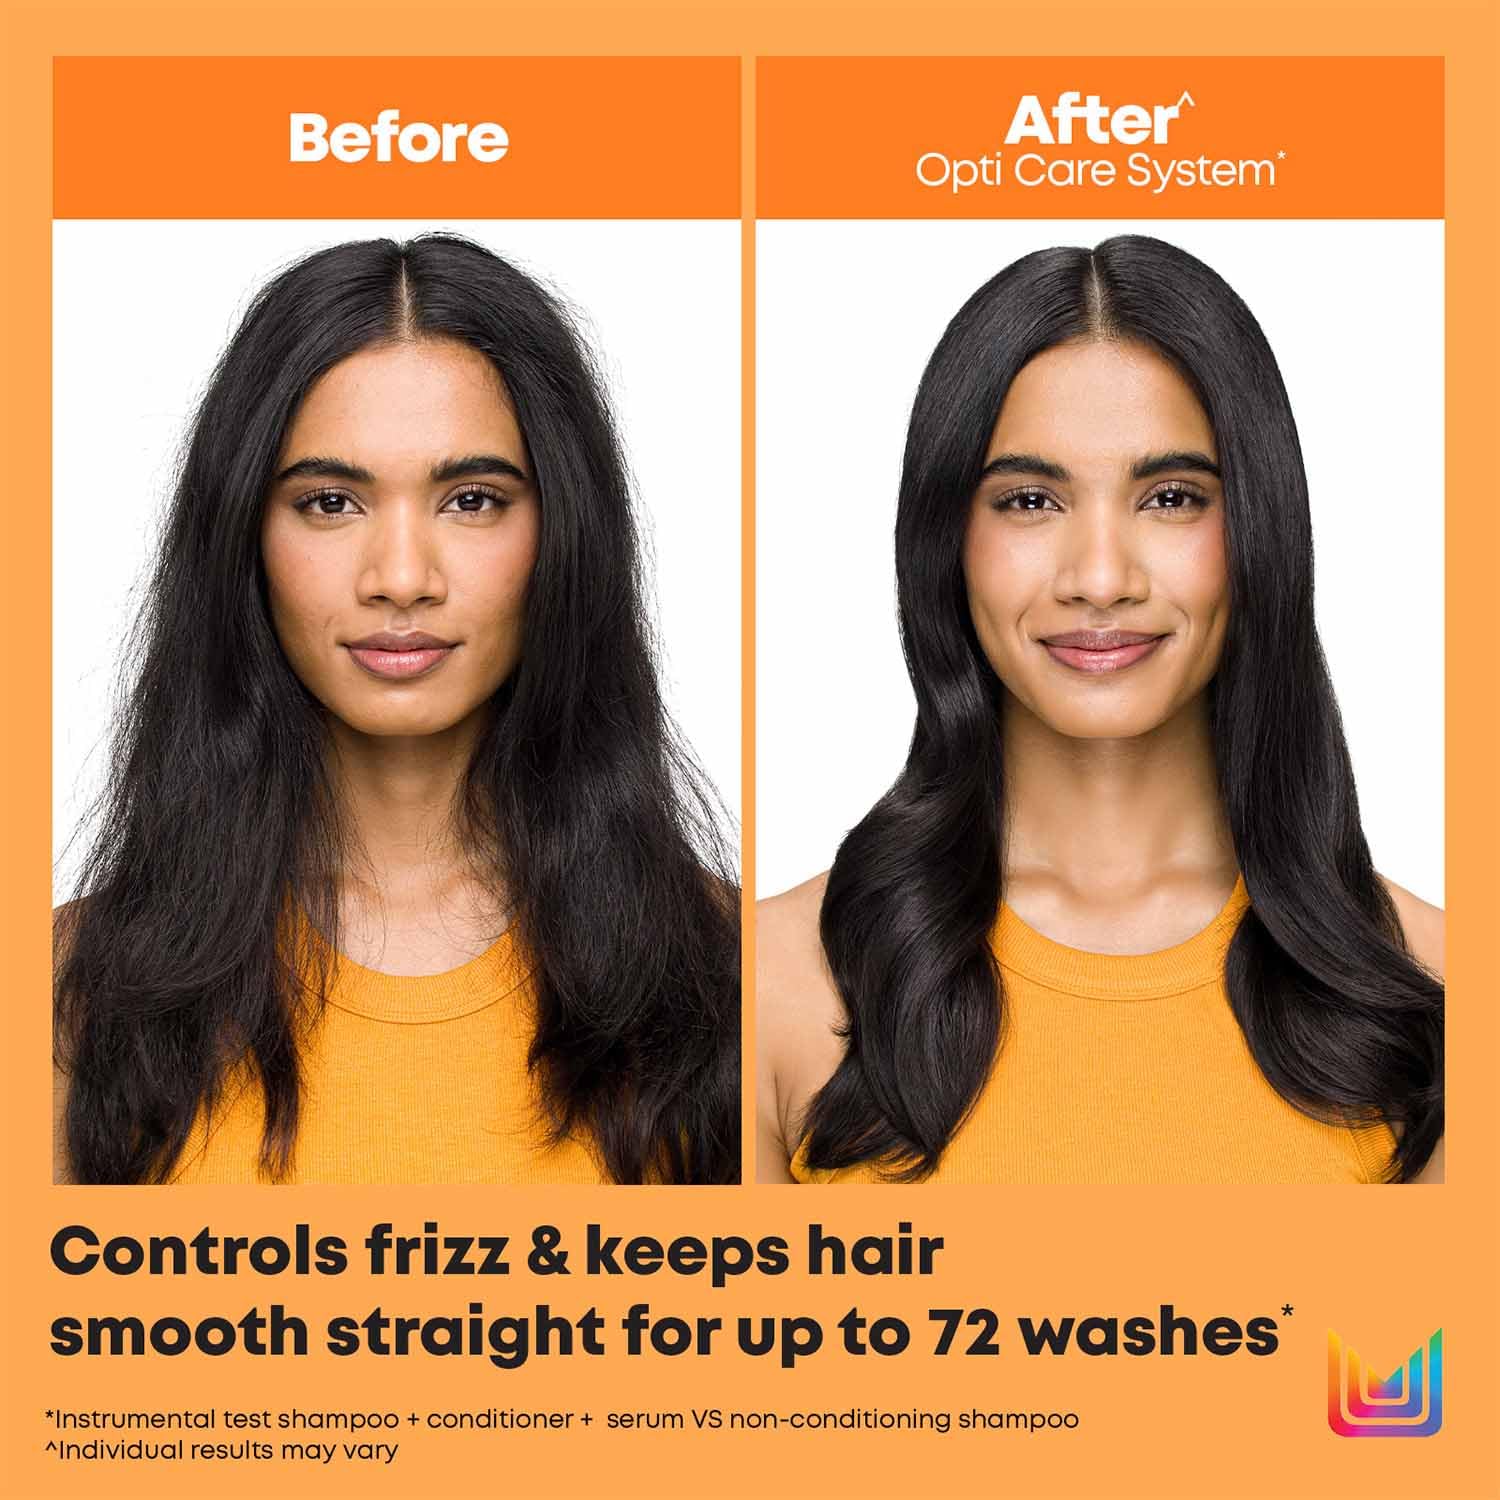 Matrix Opti.Care Professional Conditioner for Salon Smooth Straight Hair | Control Frizzy Hair for up to 4 Days | With Shea Butter | No Added Parabens | (98 g)  from Matrix